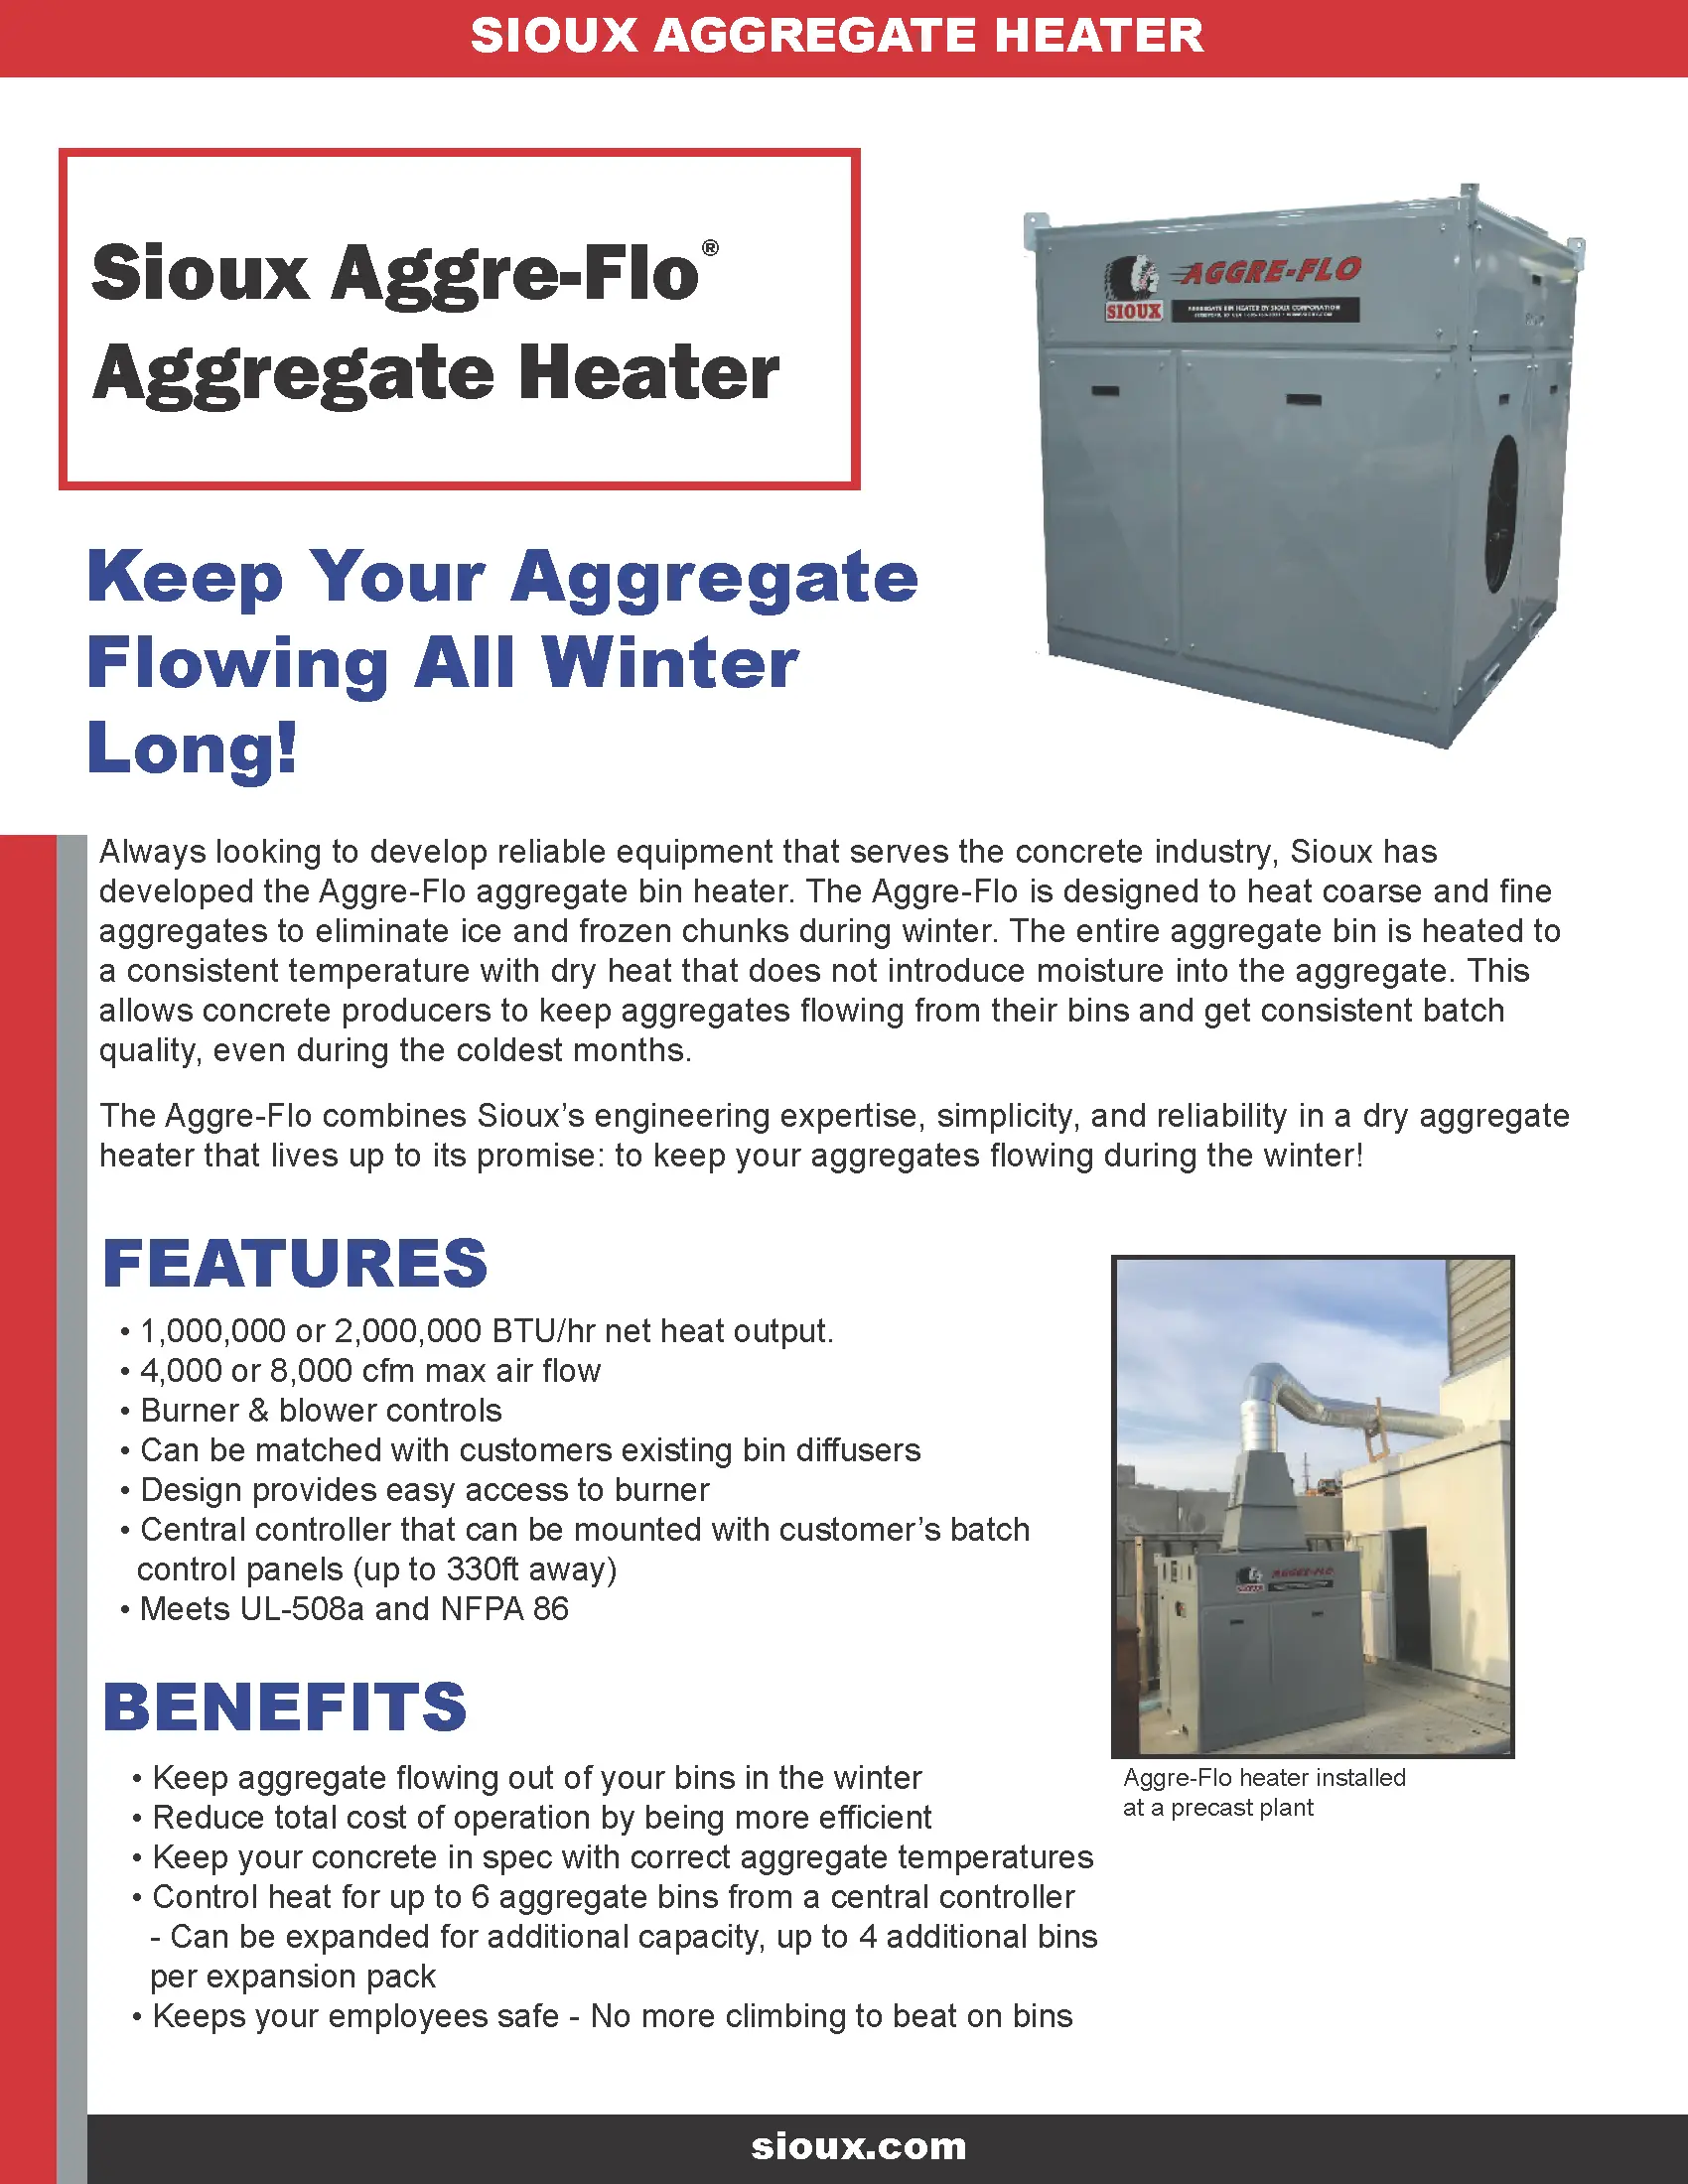 Sioux Aggregate Heater Brochure